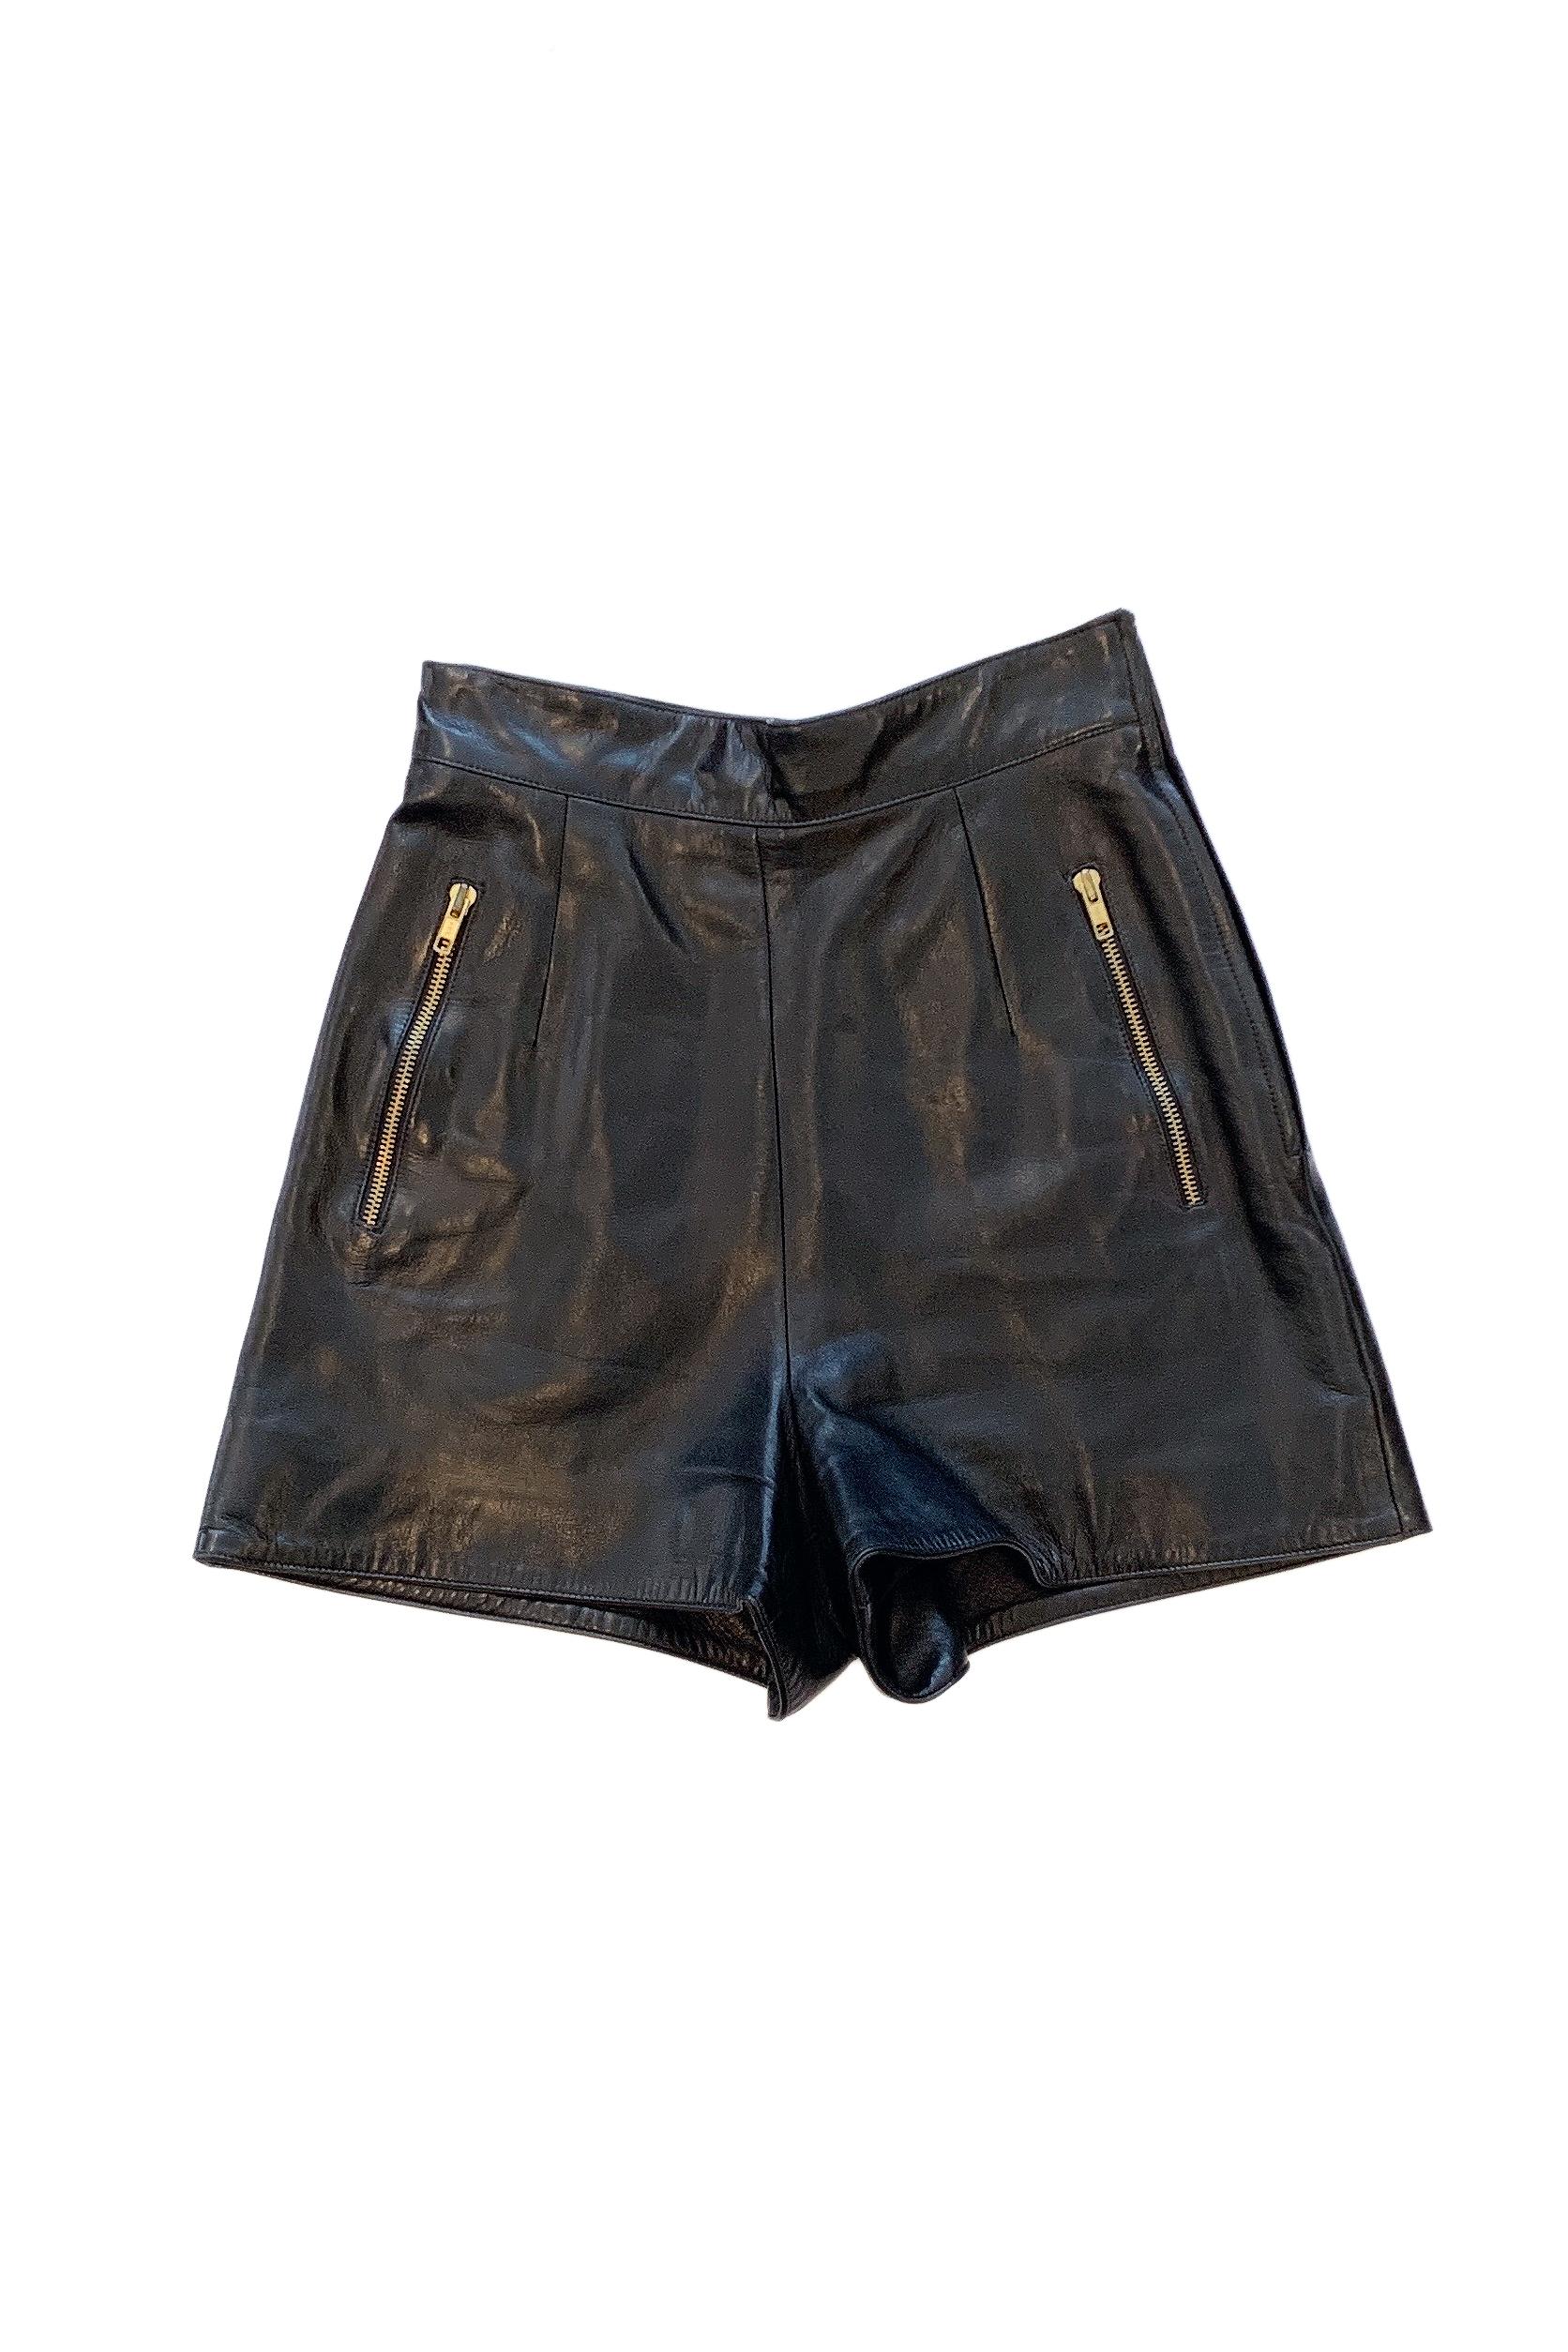 Women's Claude Montana Black Leather Shorts with Gold Zippers For Sale